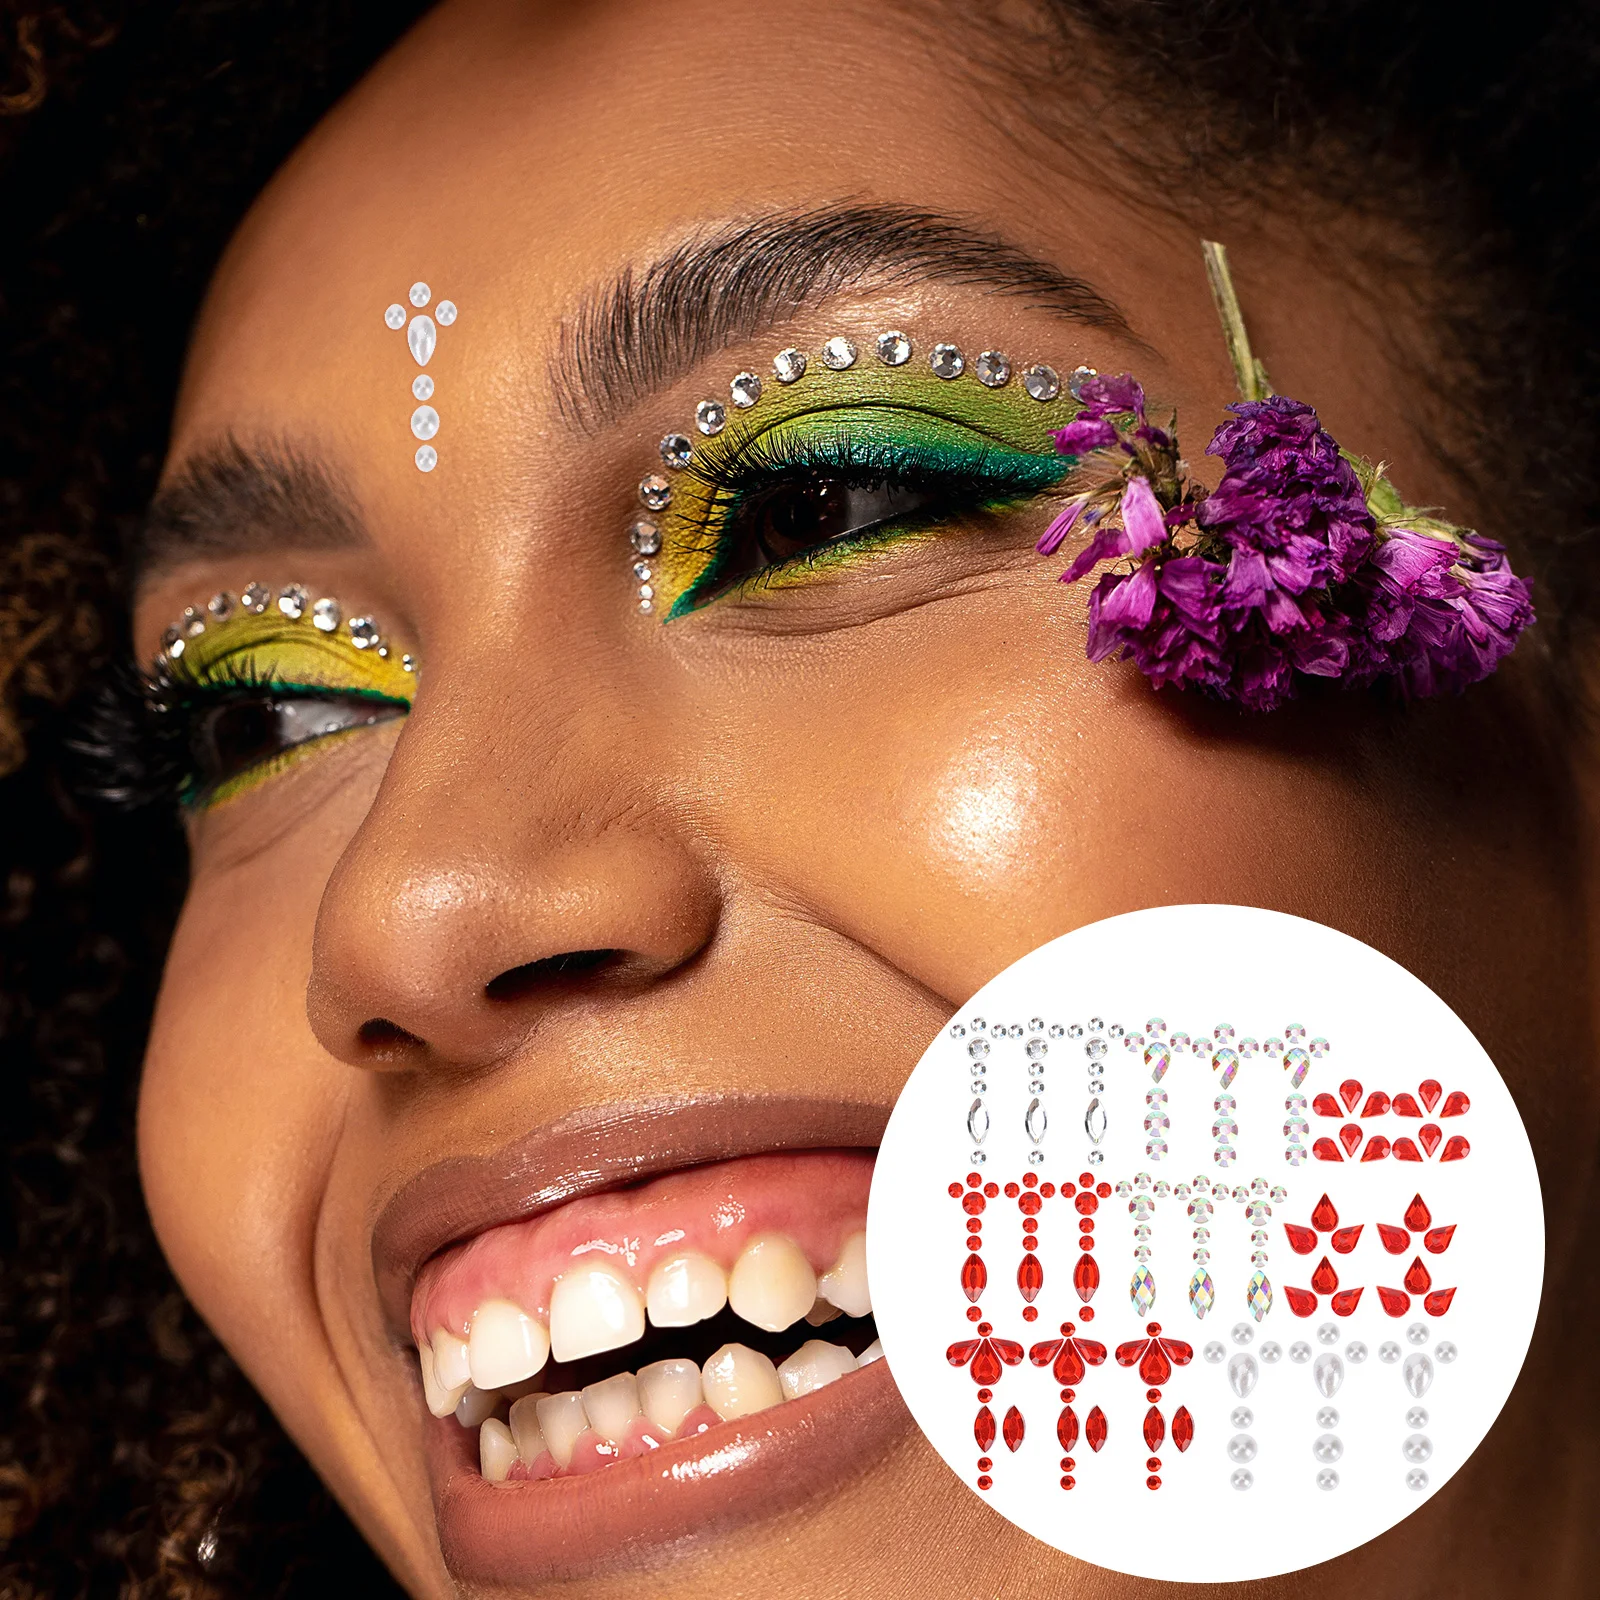 

7 Sheets Face Decals Makeup Stickers Gems for Festival Bindi Women Indian Jewels Modeling Eye